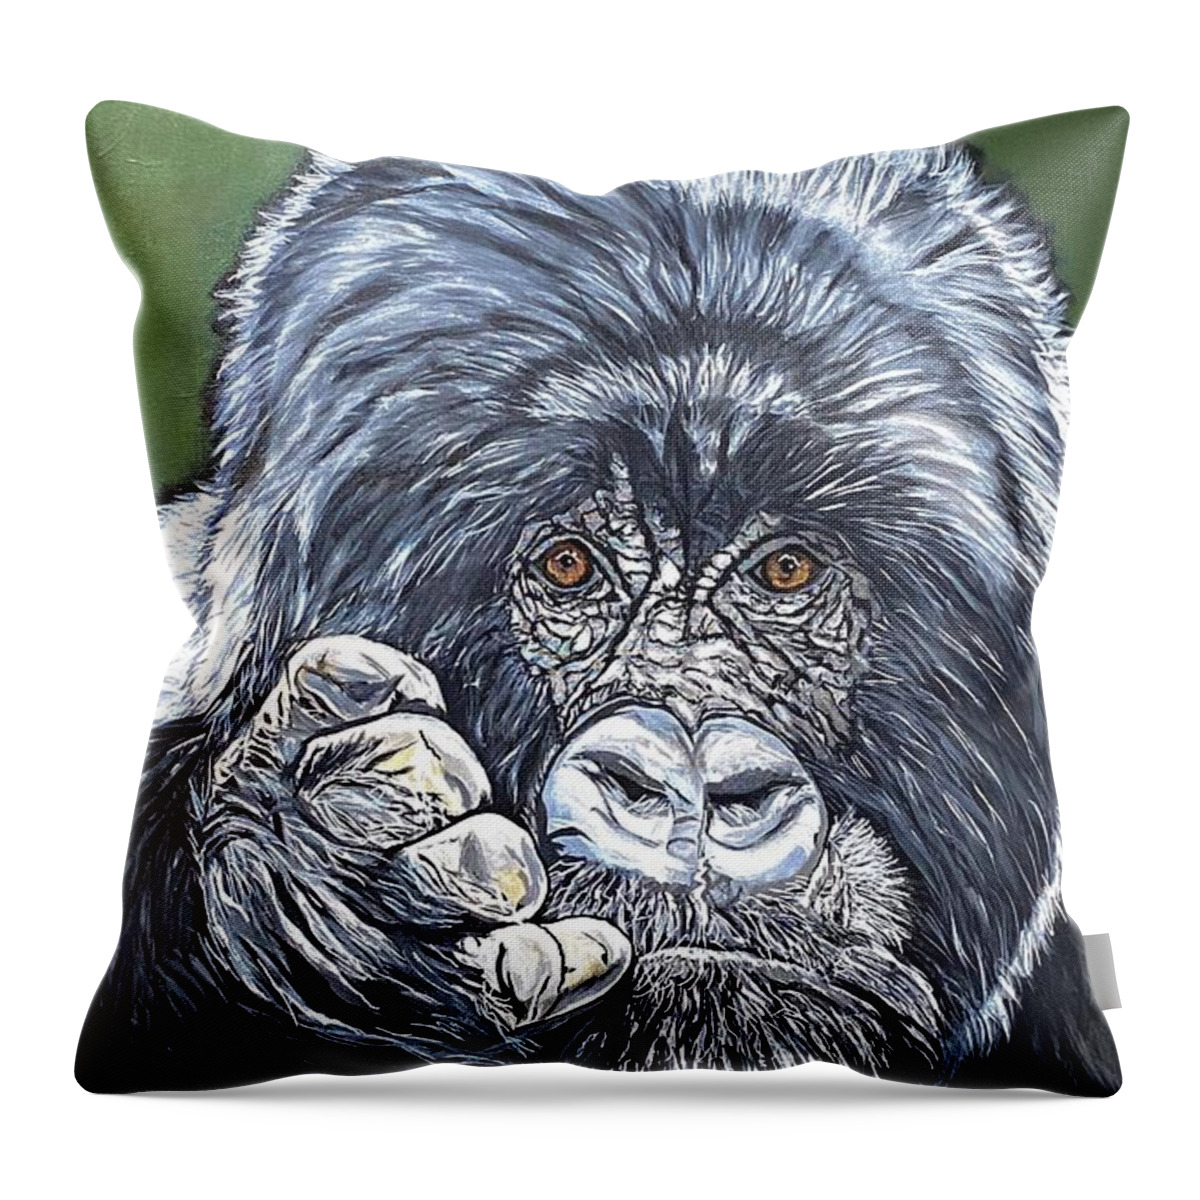  Throw Pillow featuring the painting Silverback Gorilla-Gentle Giant by Bill Manson